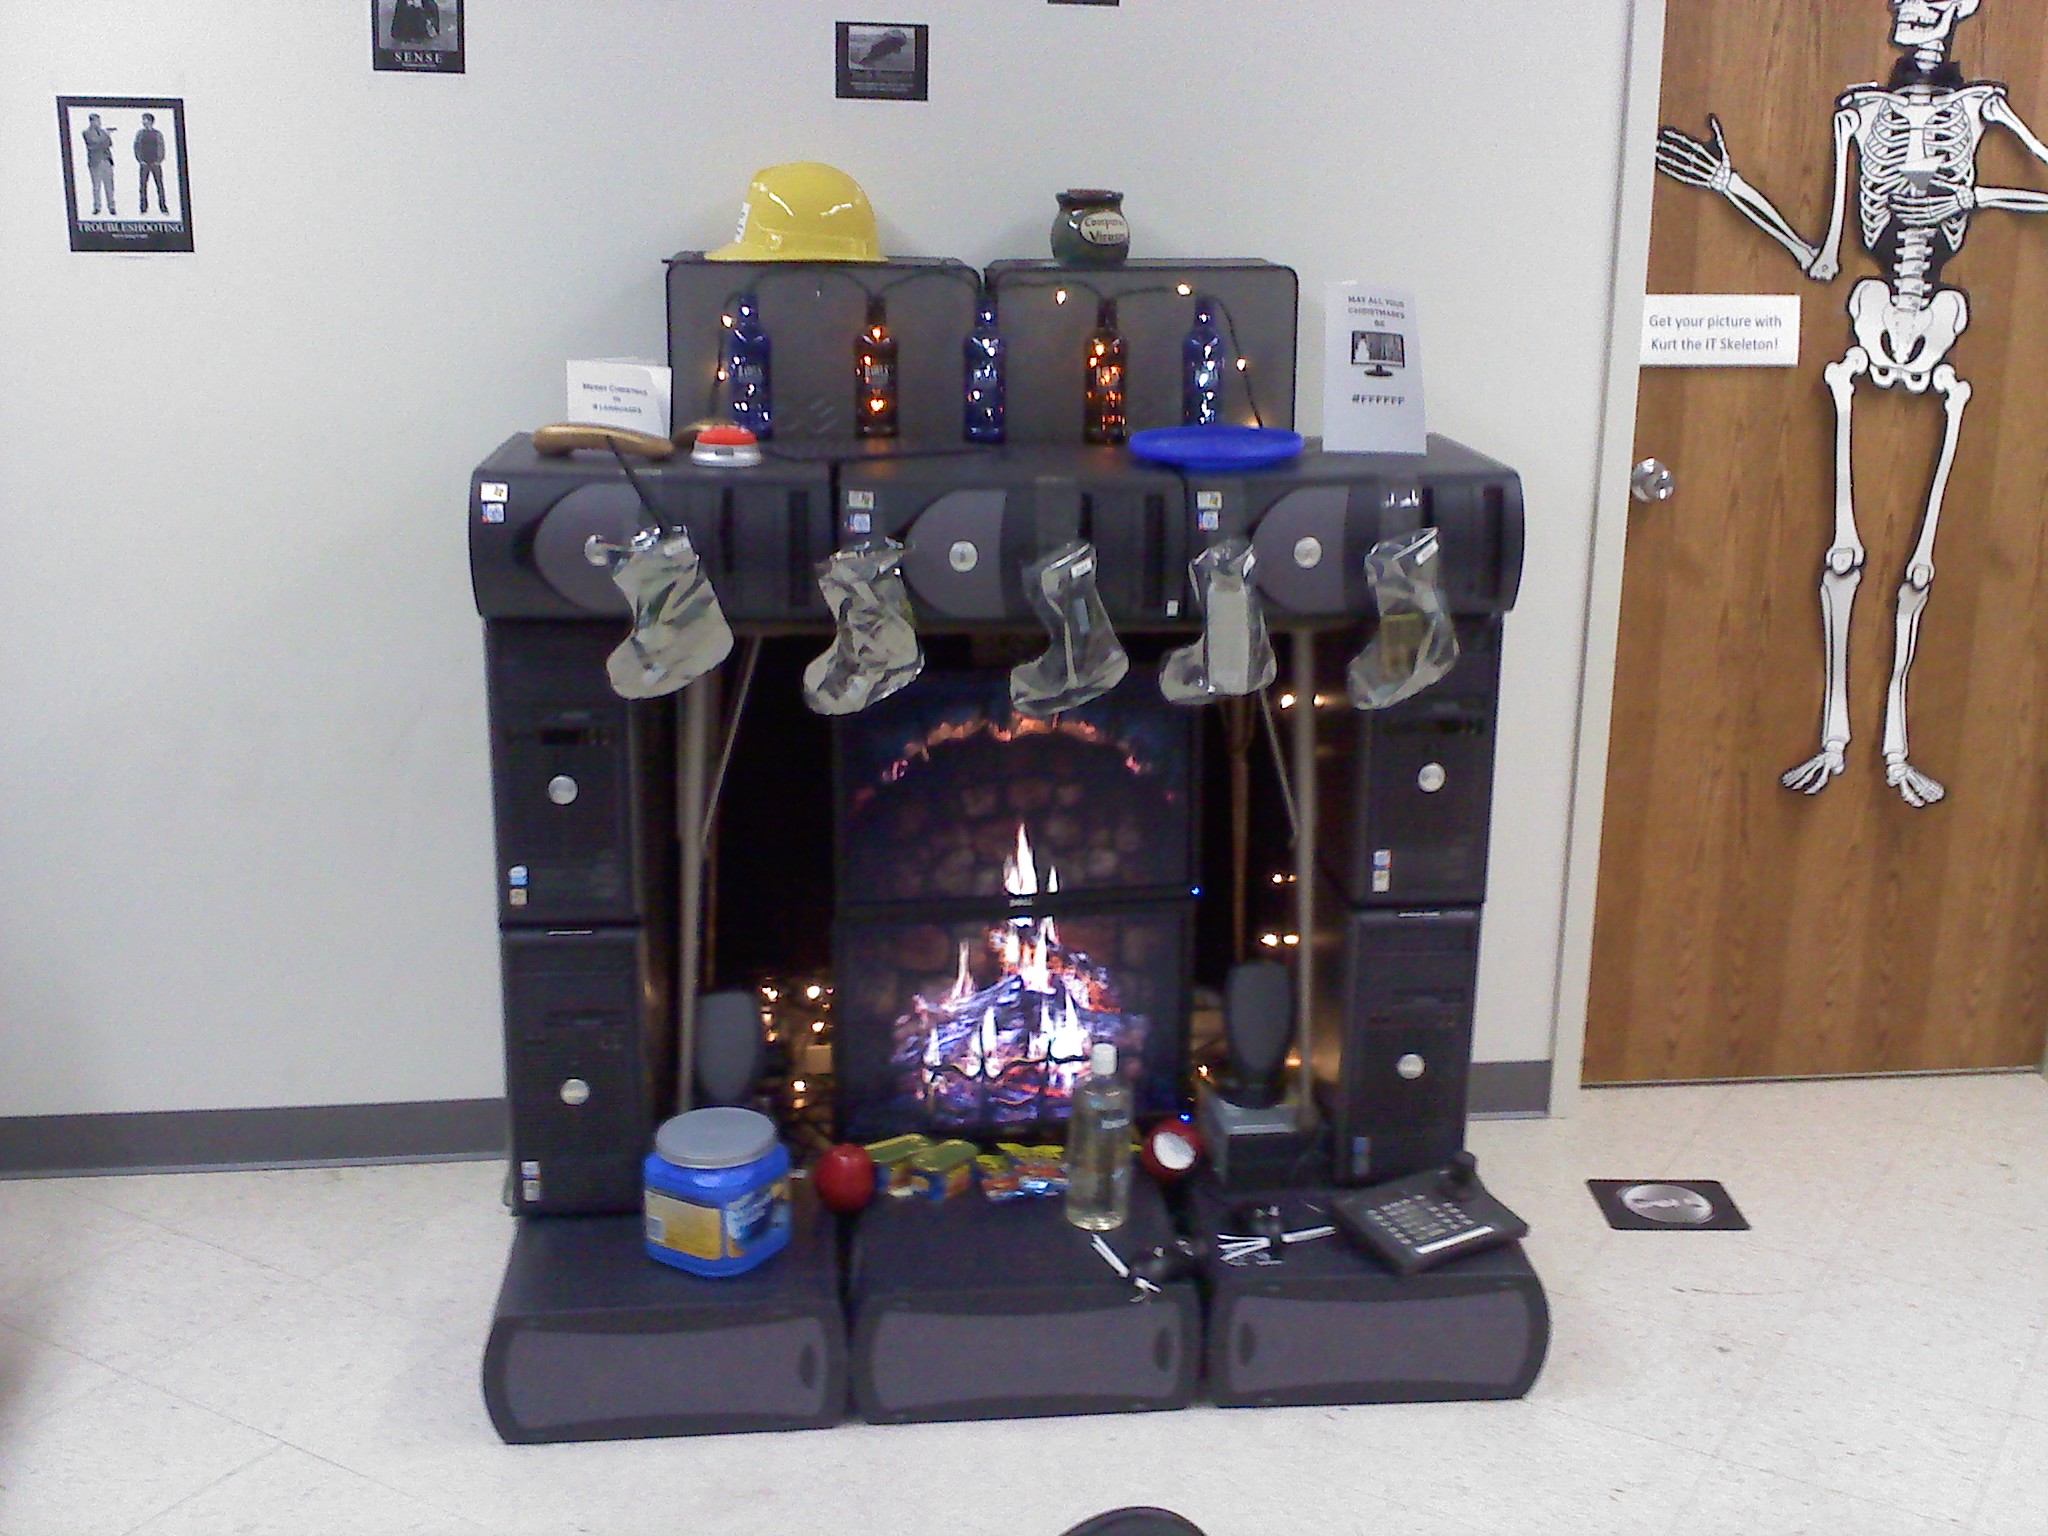 Our IT Departments Fireplace made from old Dell computers. The stockings are electrostatic bags. And of course you have to like the Bawls Bottles. 